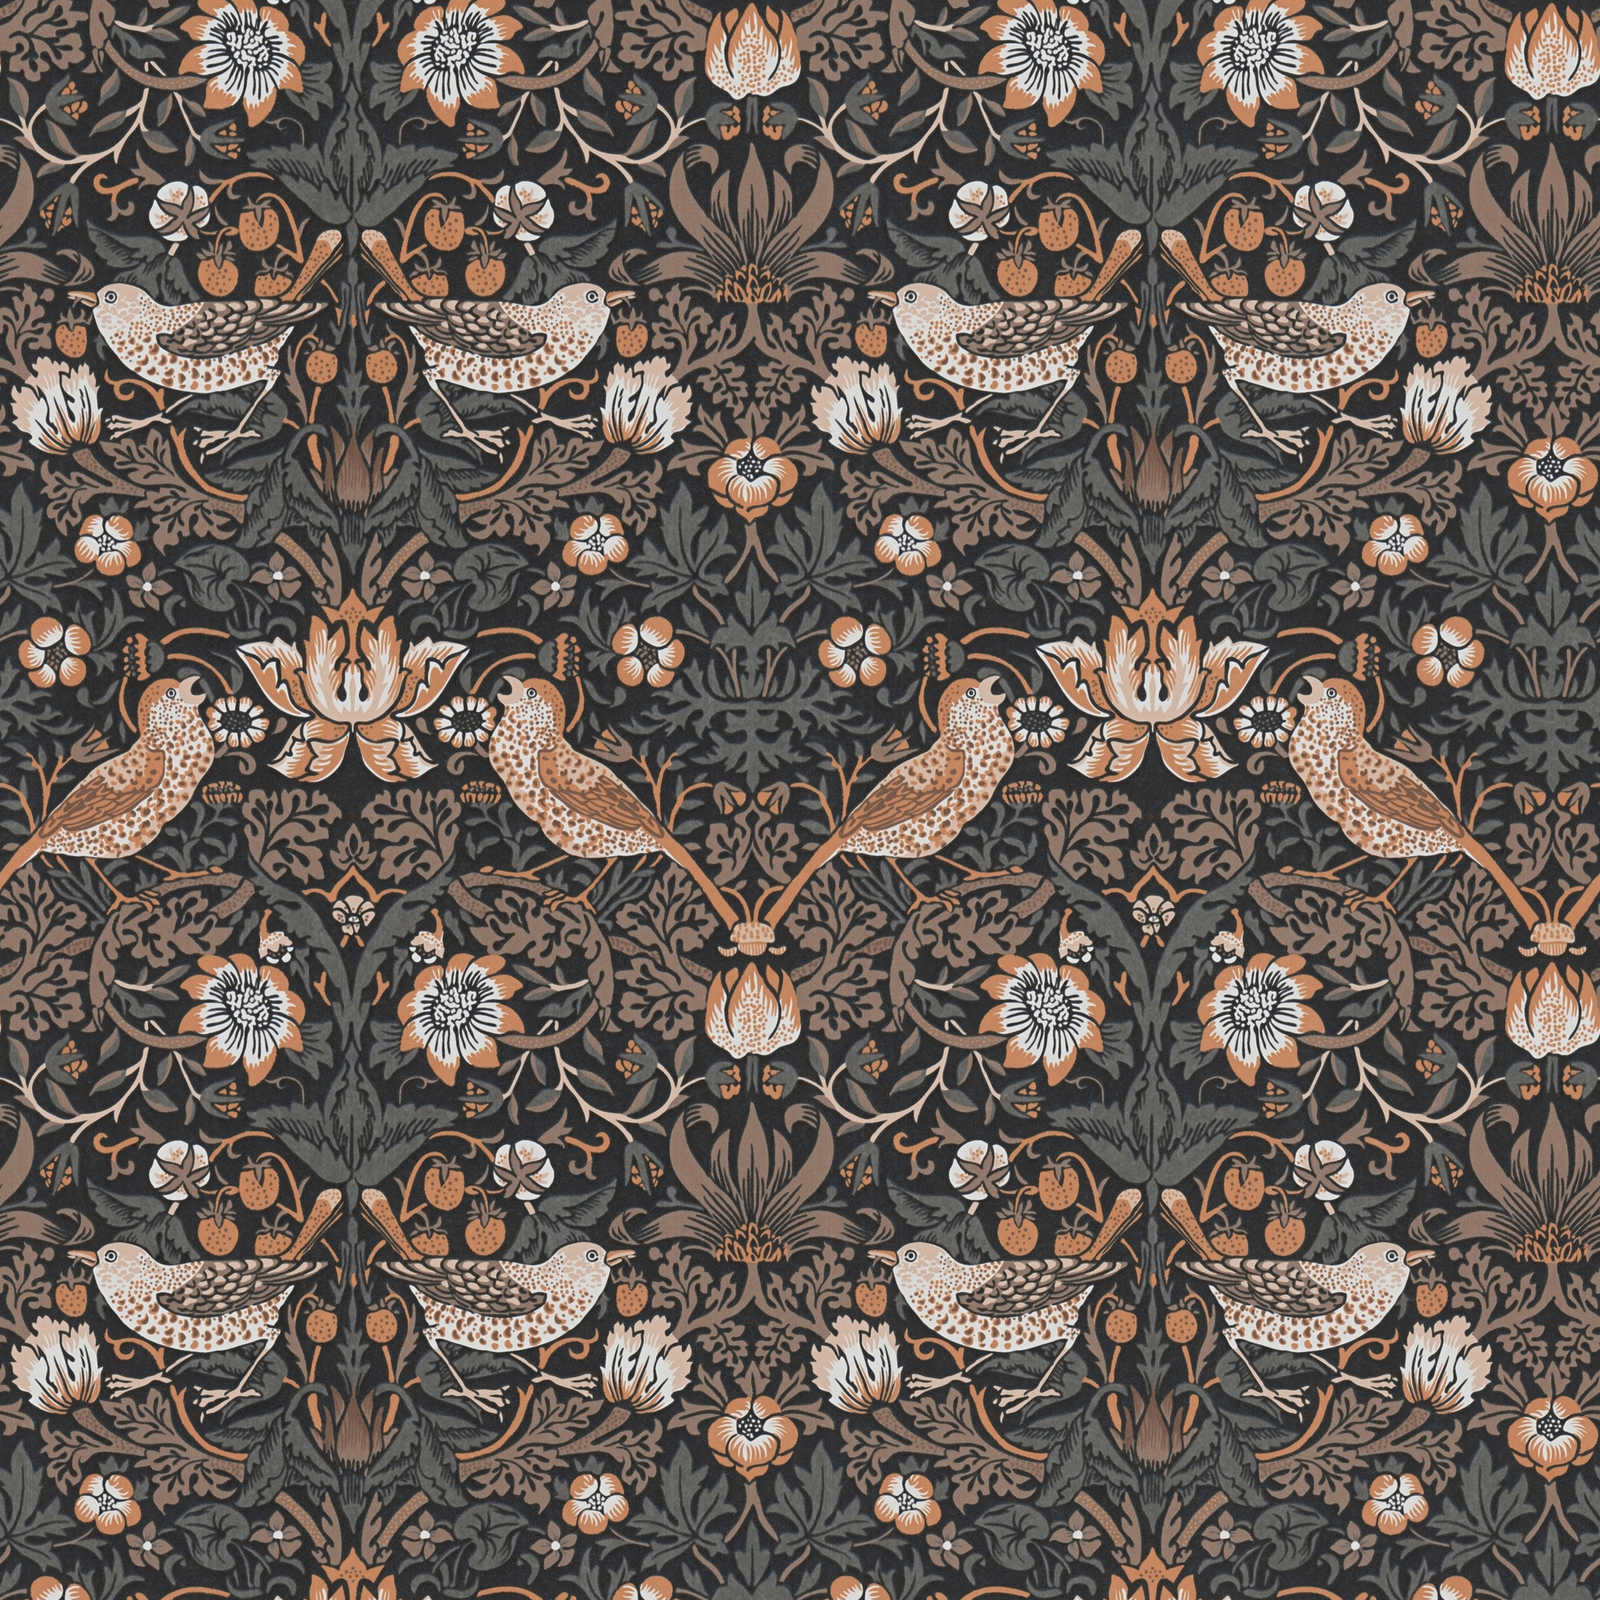 Floral wallpaper with birds in bright colours - orange, black, white
